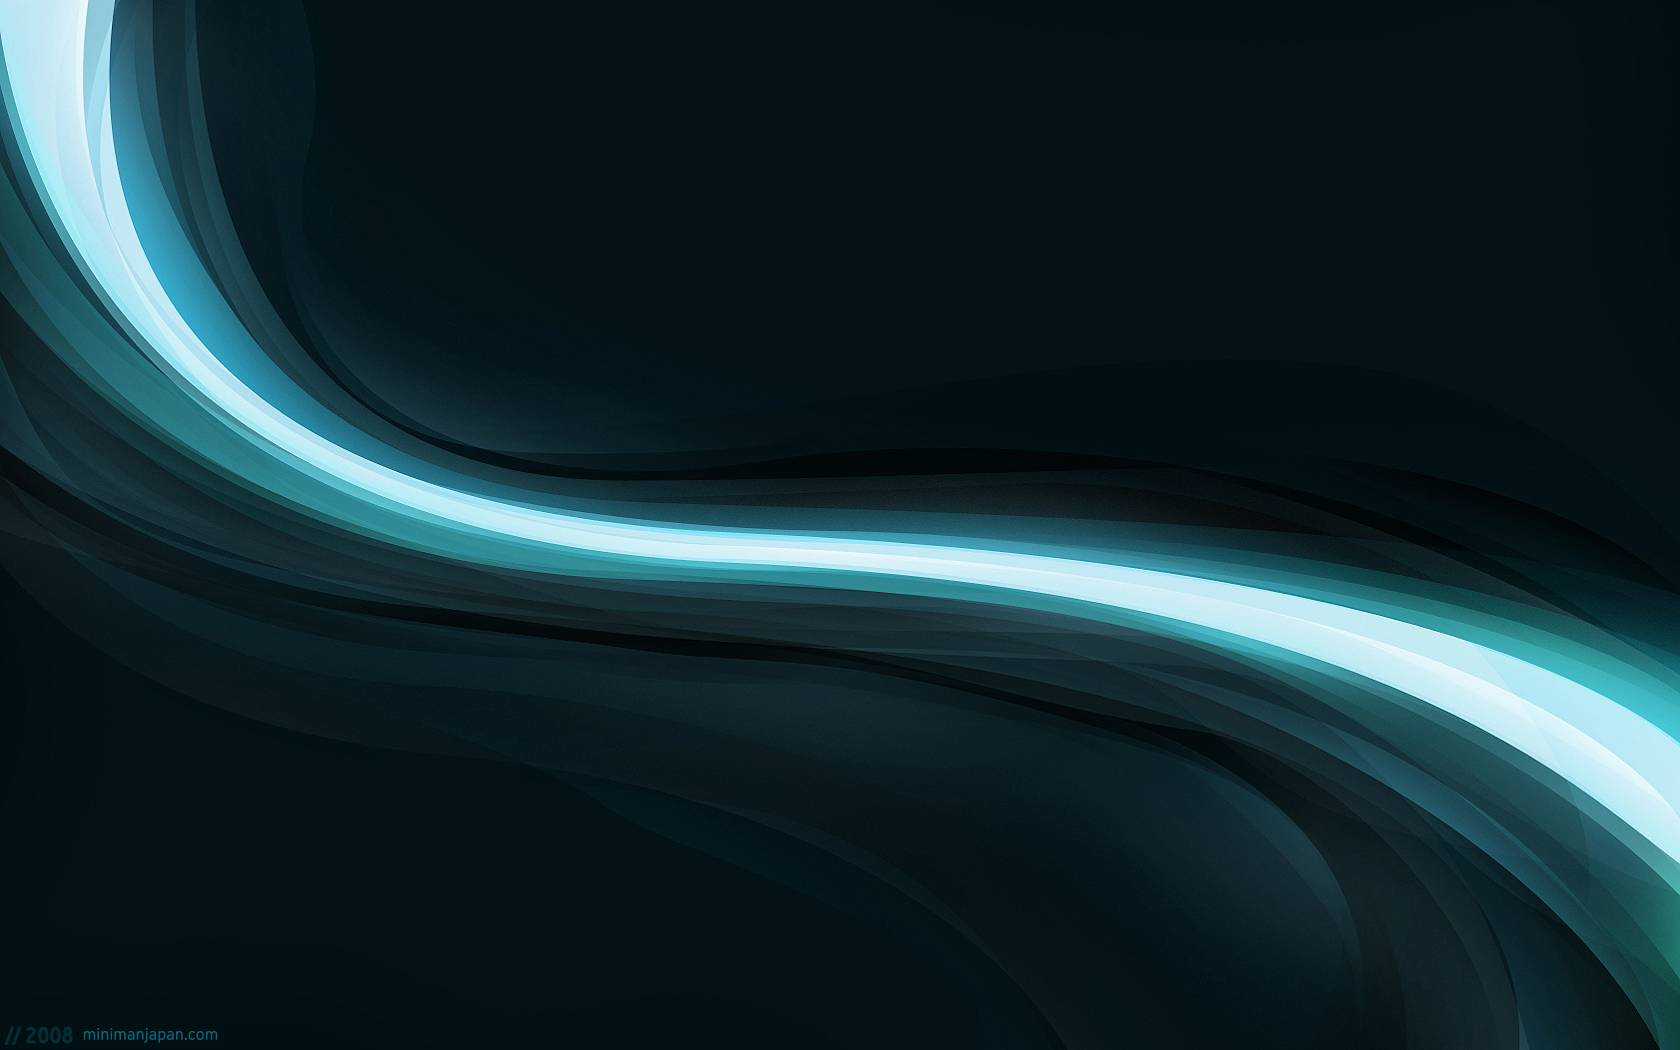 Free download project bluewave images graphic background right ...